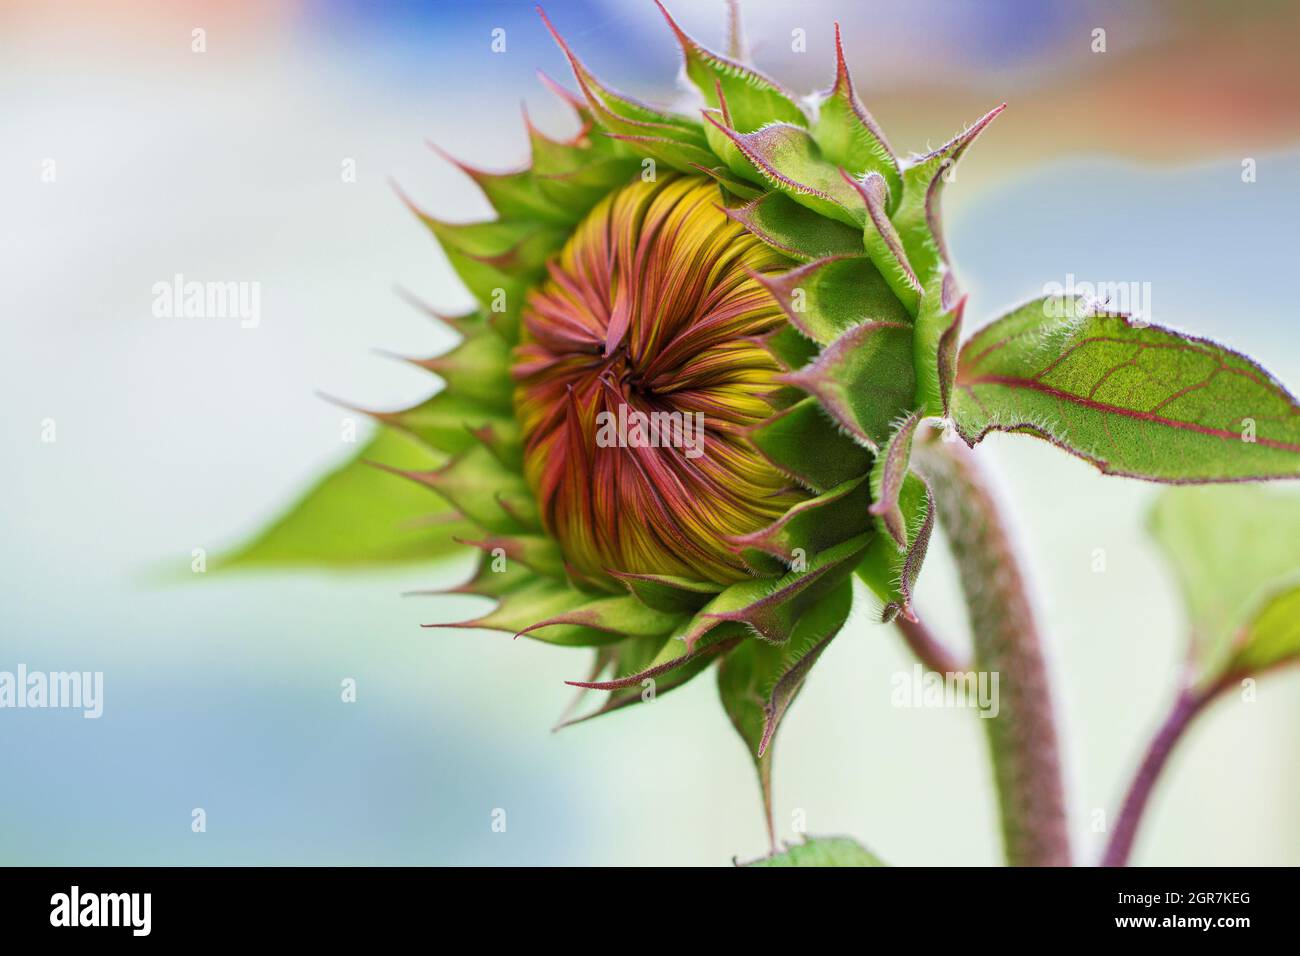 Unopened Sunflower Bud. Close Up. Macro. Selective Focus. Abstract Background. Stock Photo